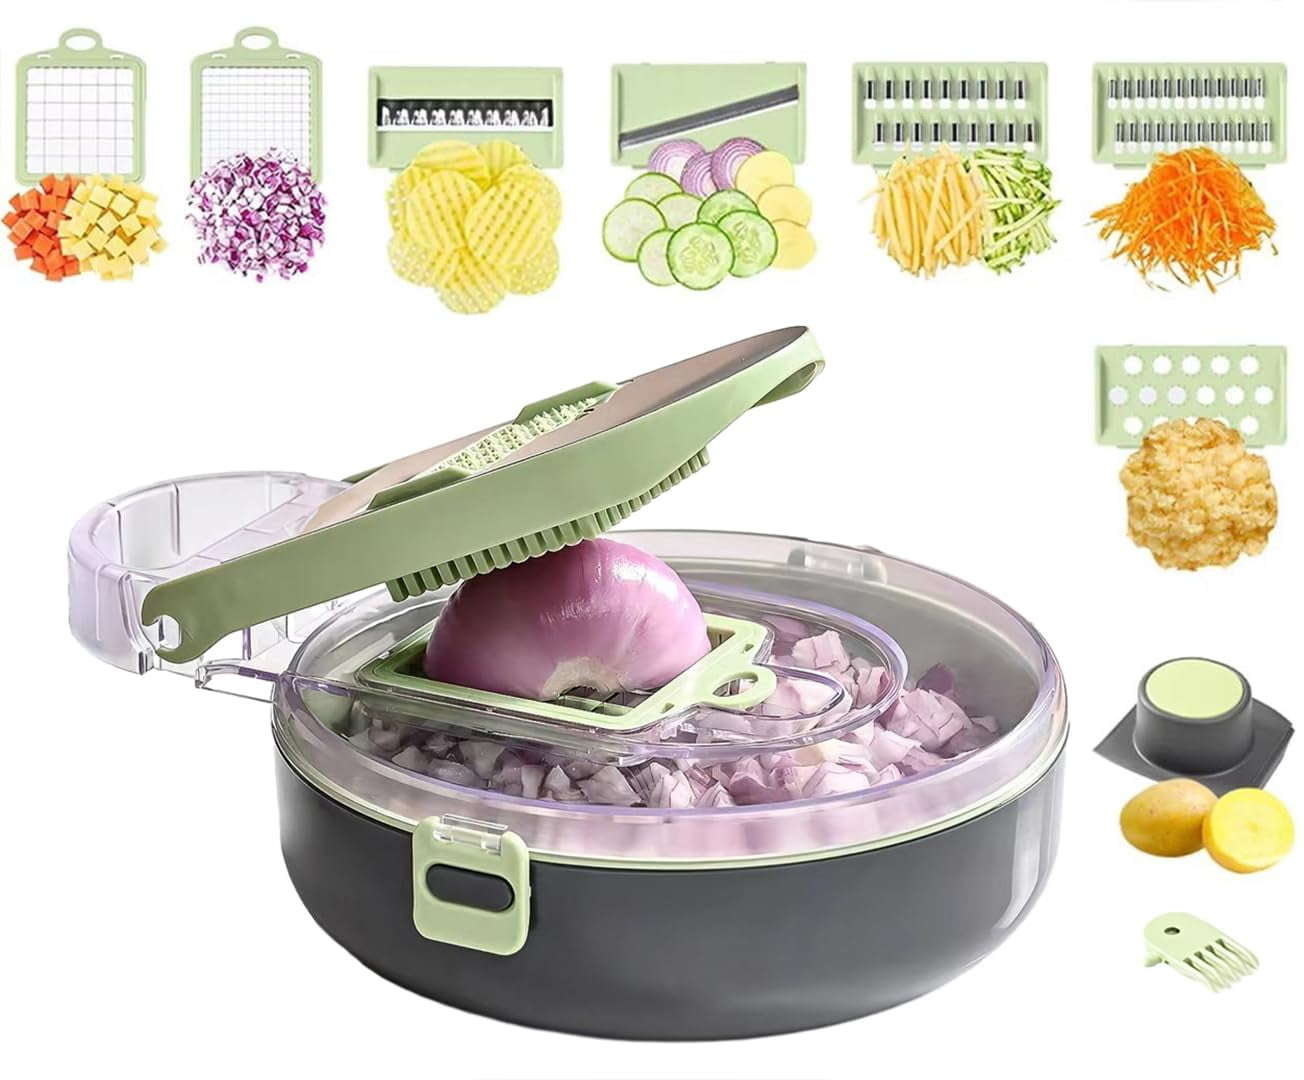  Mueller Pro-Series 10-in-1, 8 Blade Vegetable Chopper, Onion  Mincer, Cutter, Dicer, Egg Slicer with Container: Home & Kitchen